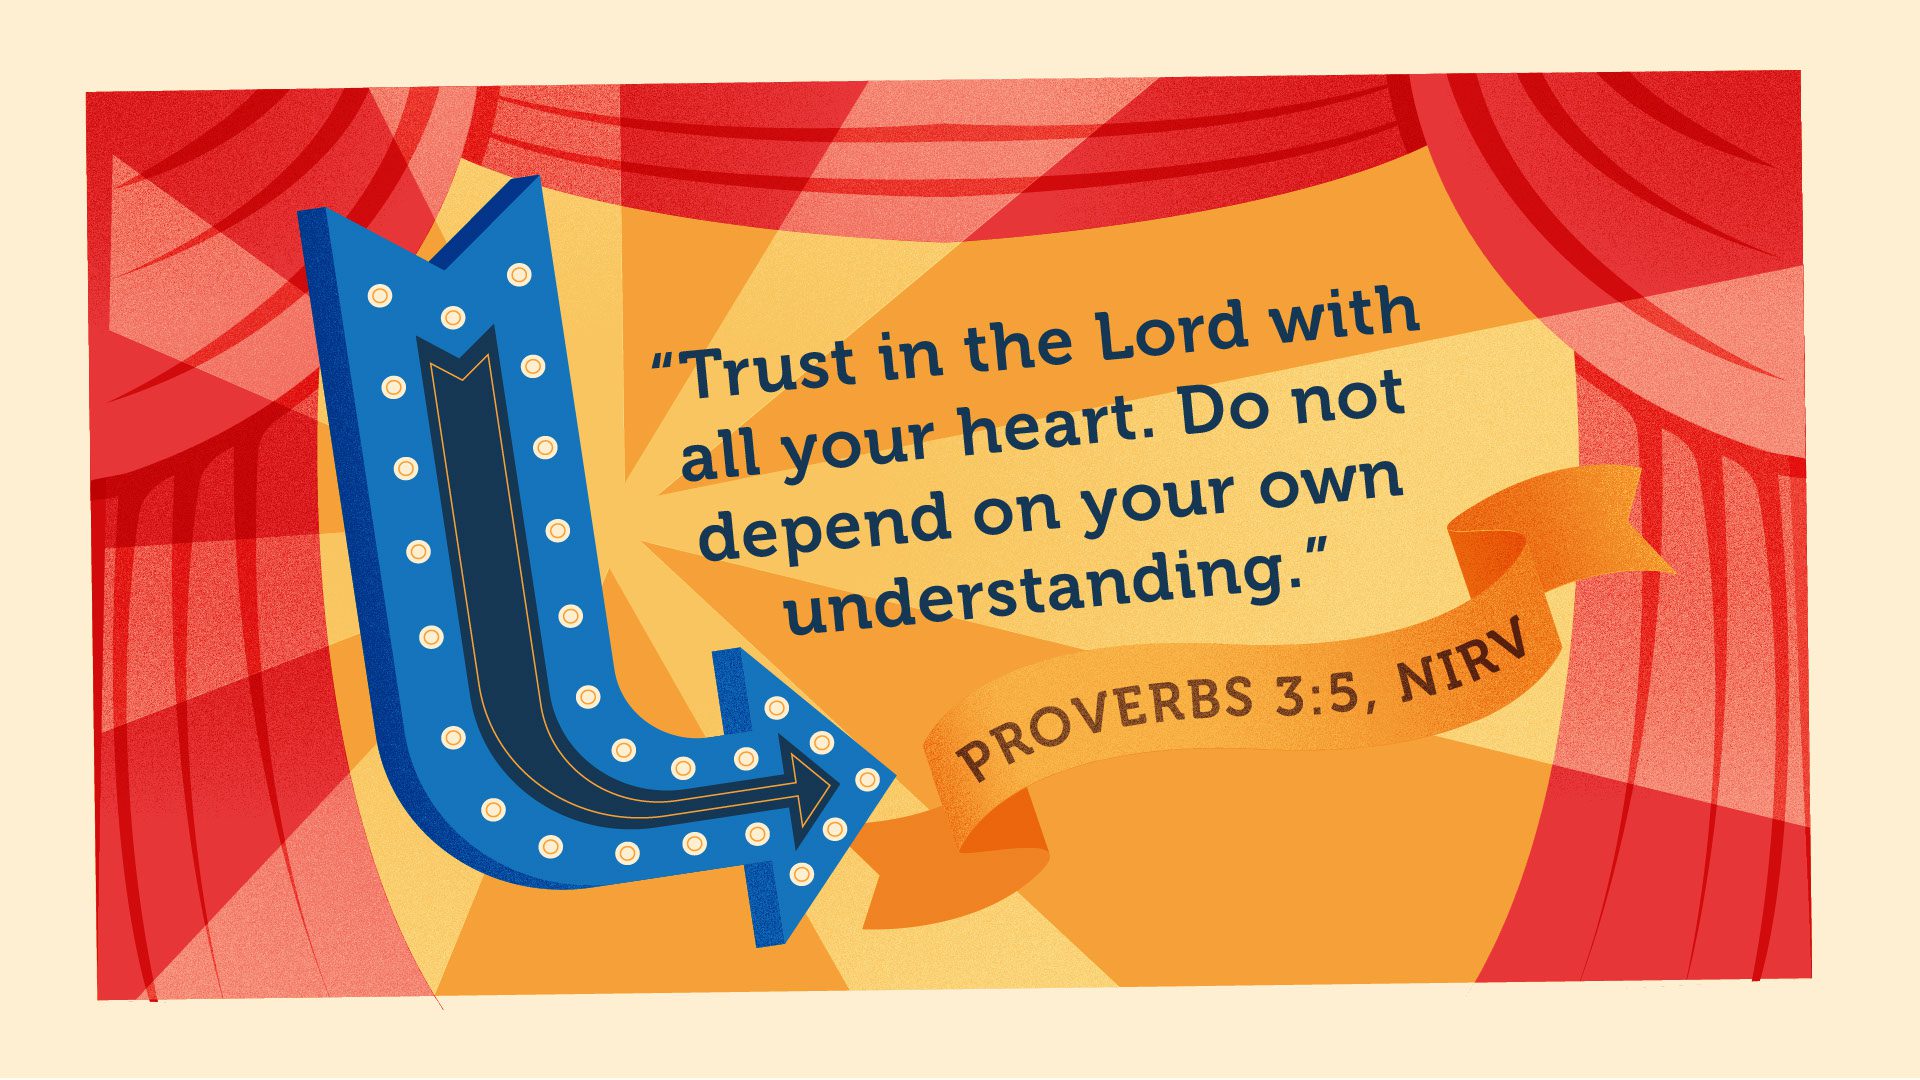 Trust in the Lord with all your heart.